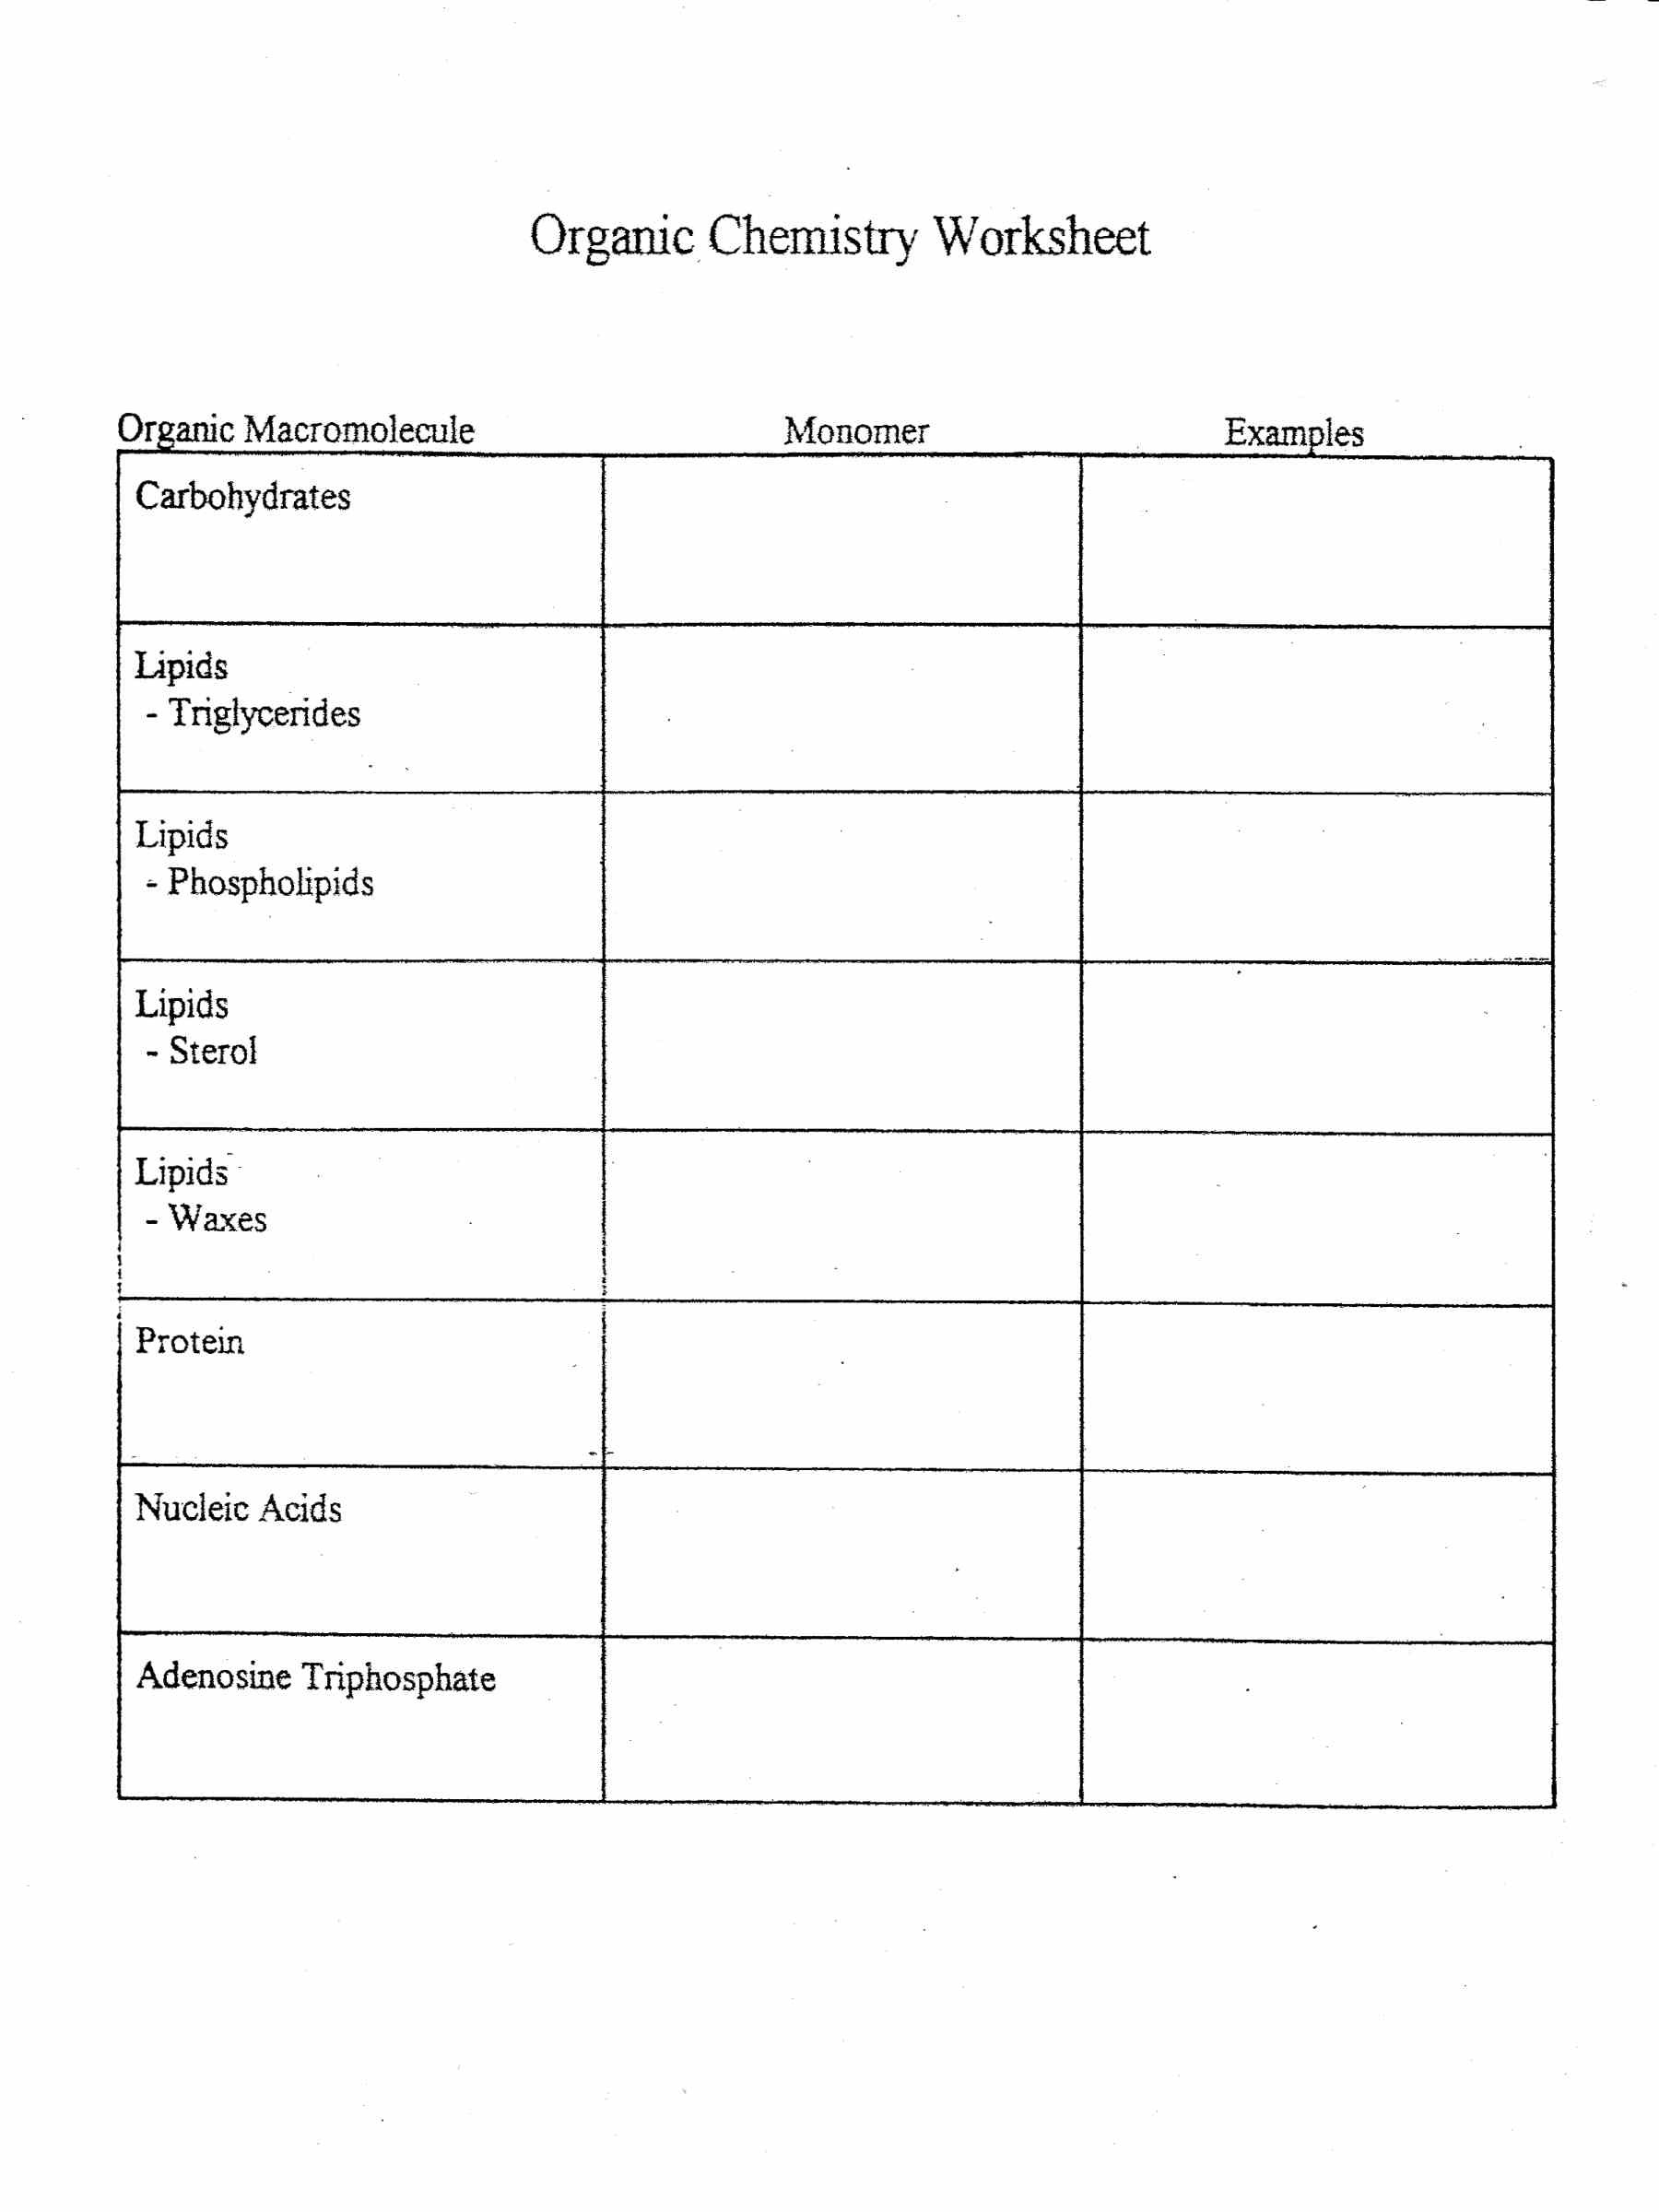 ratio-table-task-cards-and-recording-sheets-ccs-6-rp-1-6-rp-3a